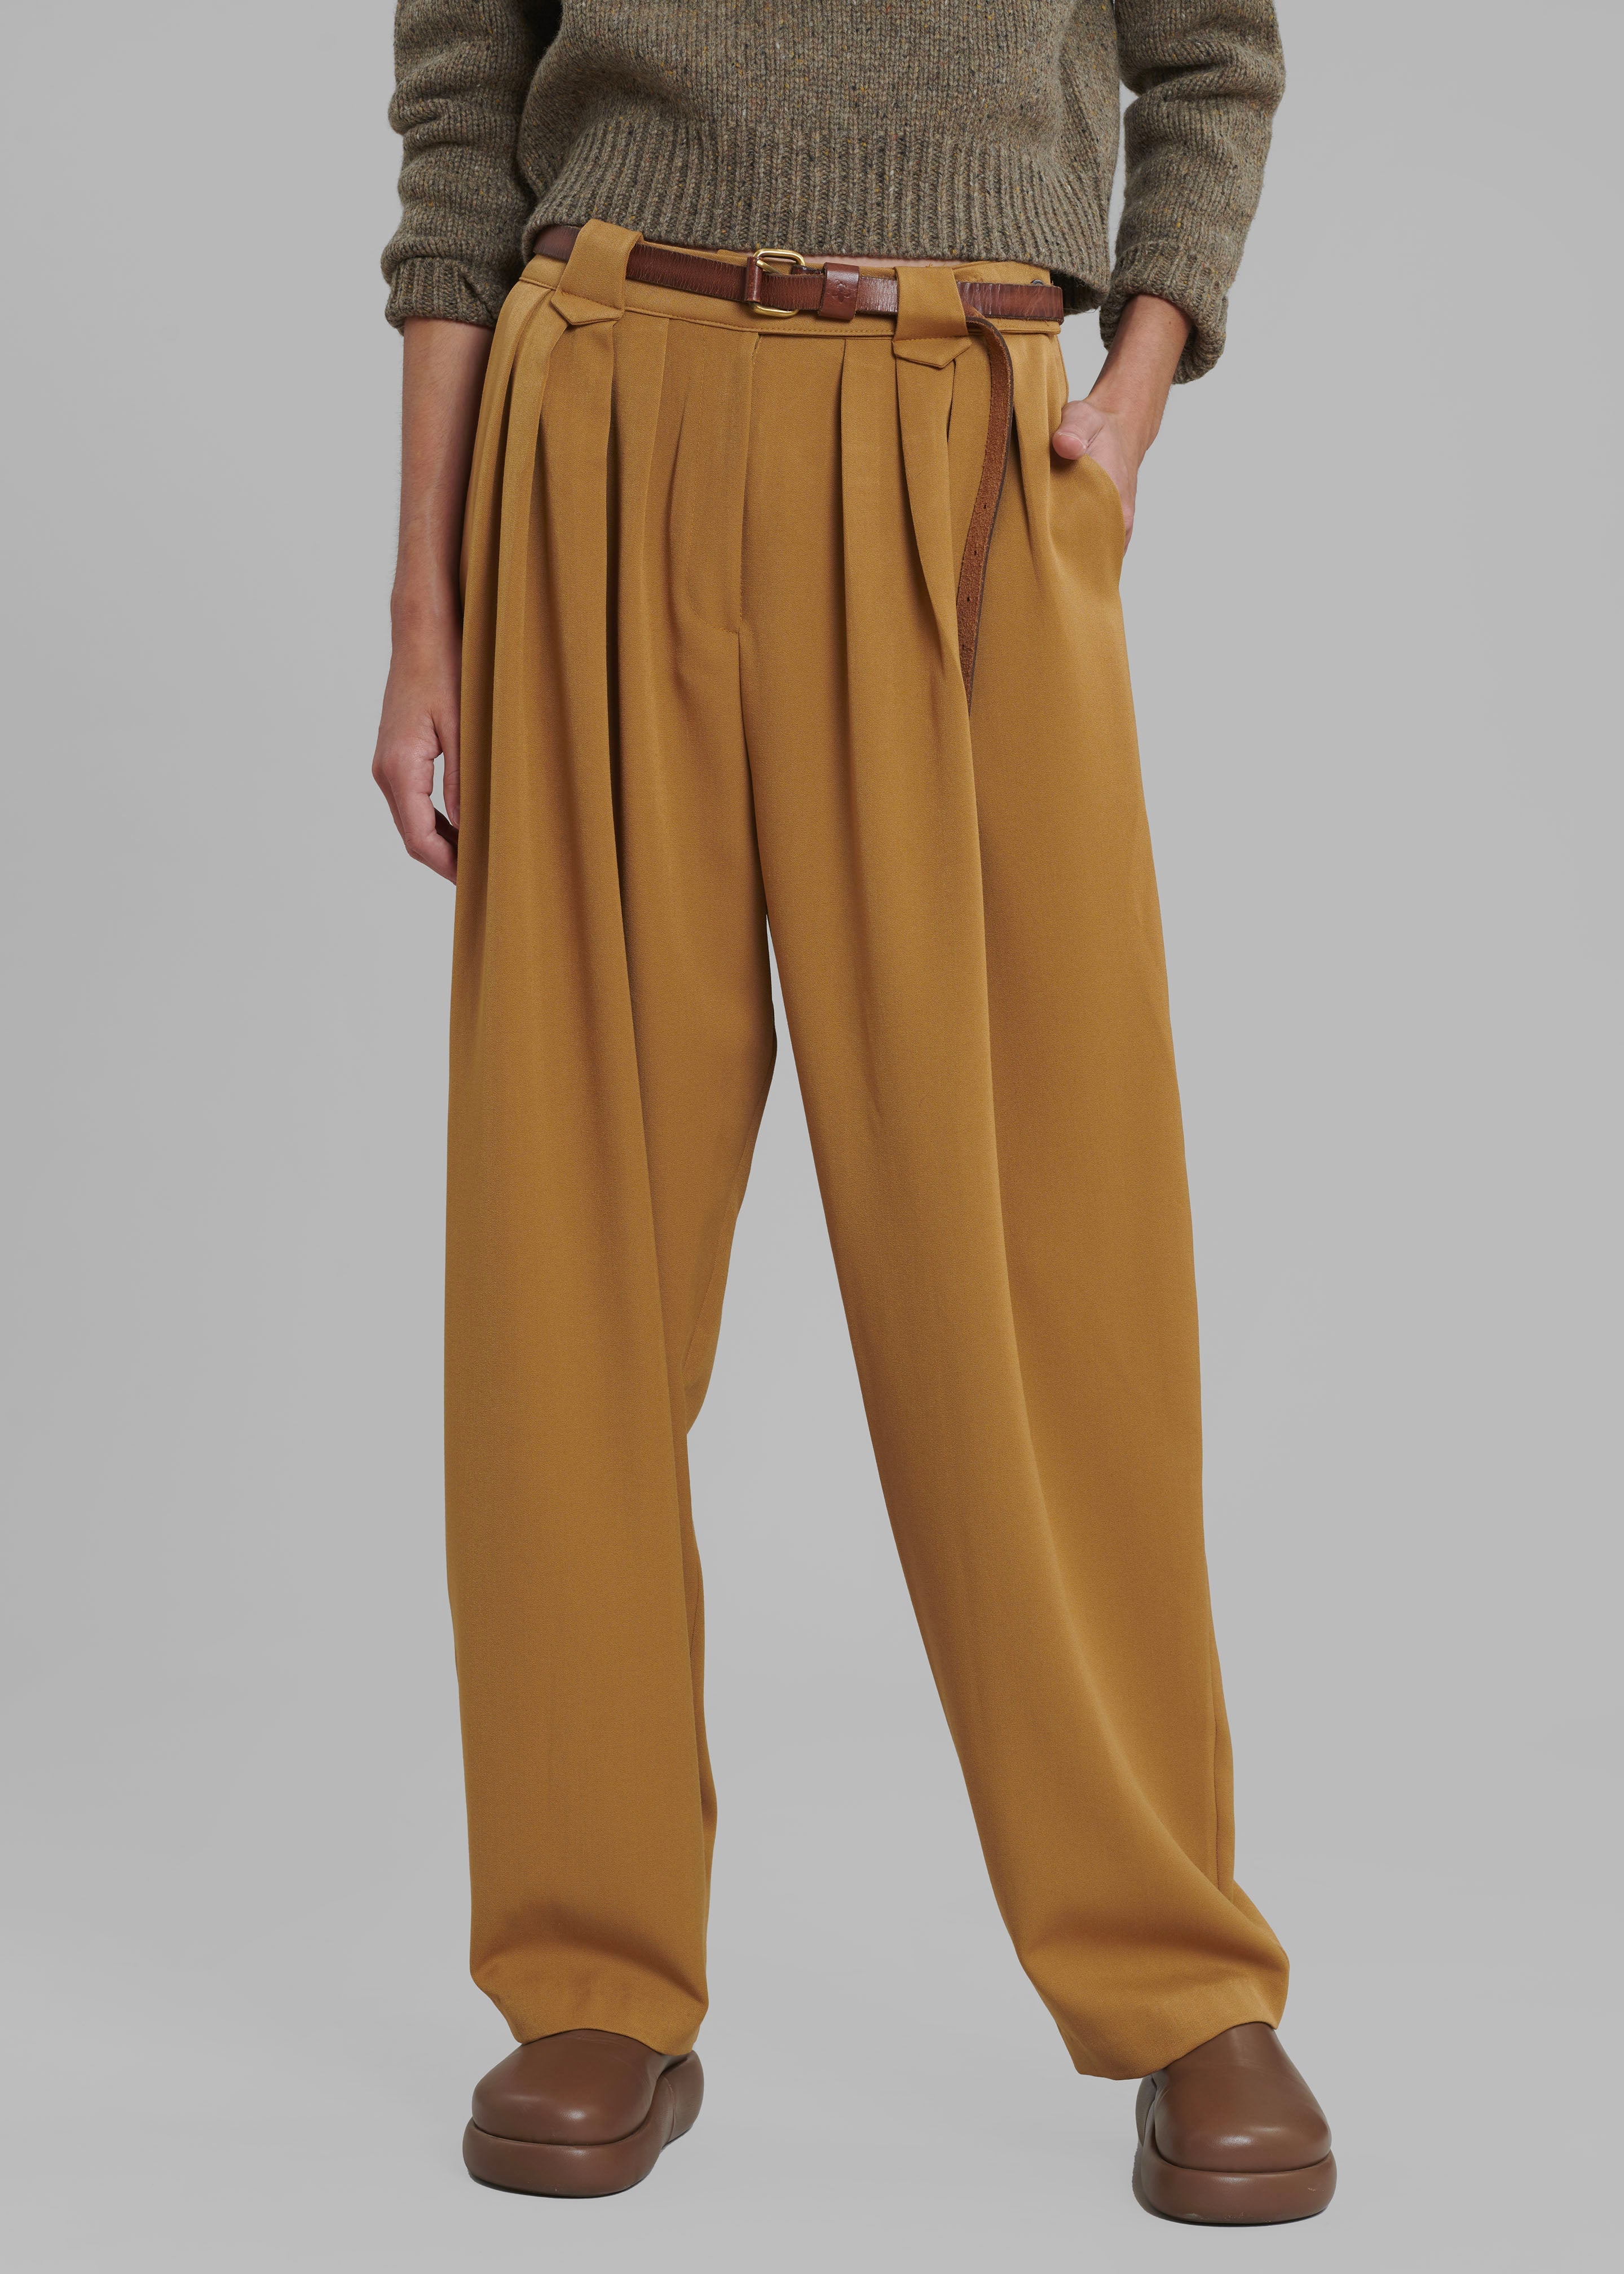 Luce Pleated Pants - Ginger - 5